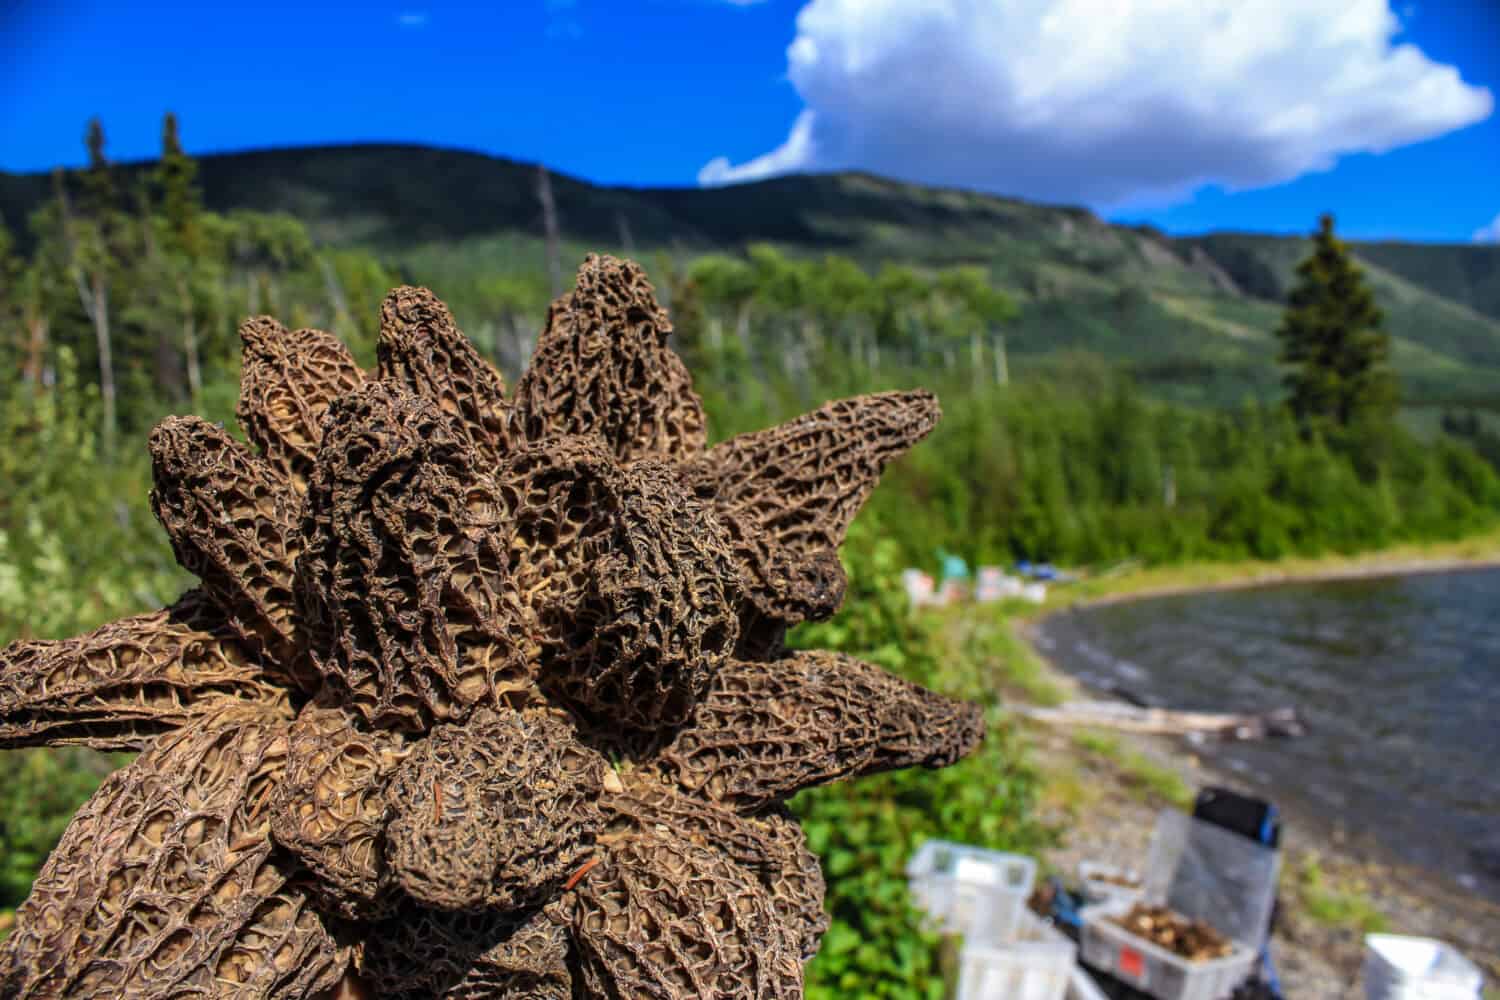 Morel mushroom flower, composed of about 30 individual morel mushroom growing on a single stem - 2/2 - Closeup picture with mountains, forests, blue sky and lake in the background